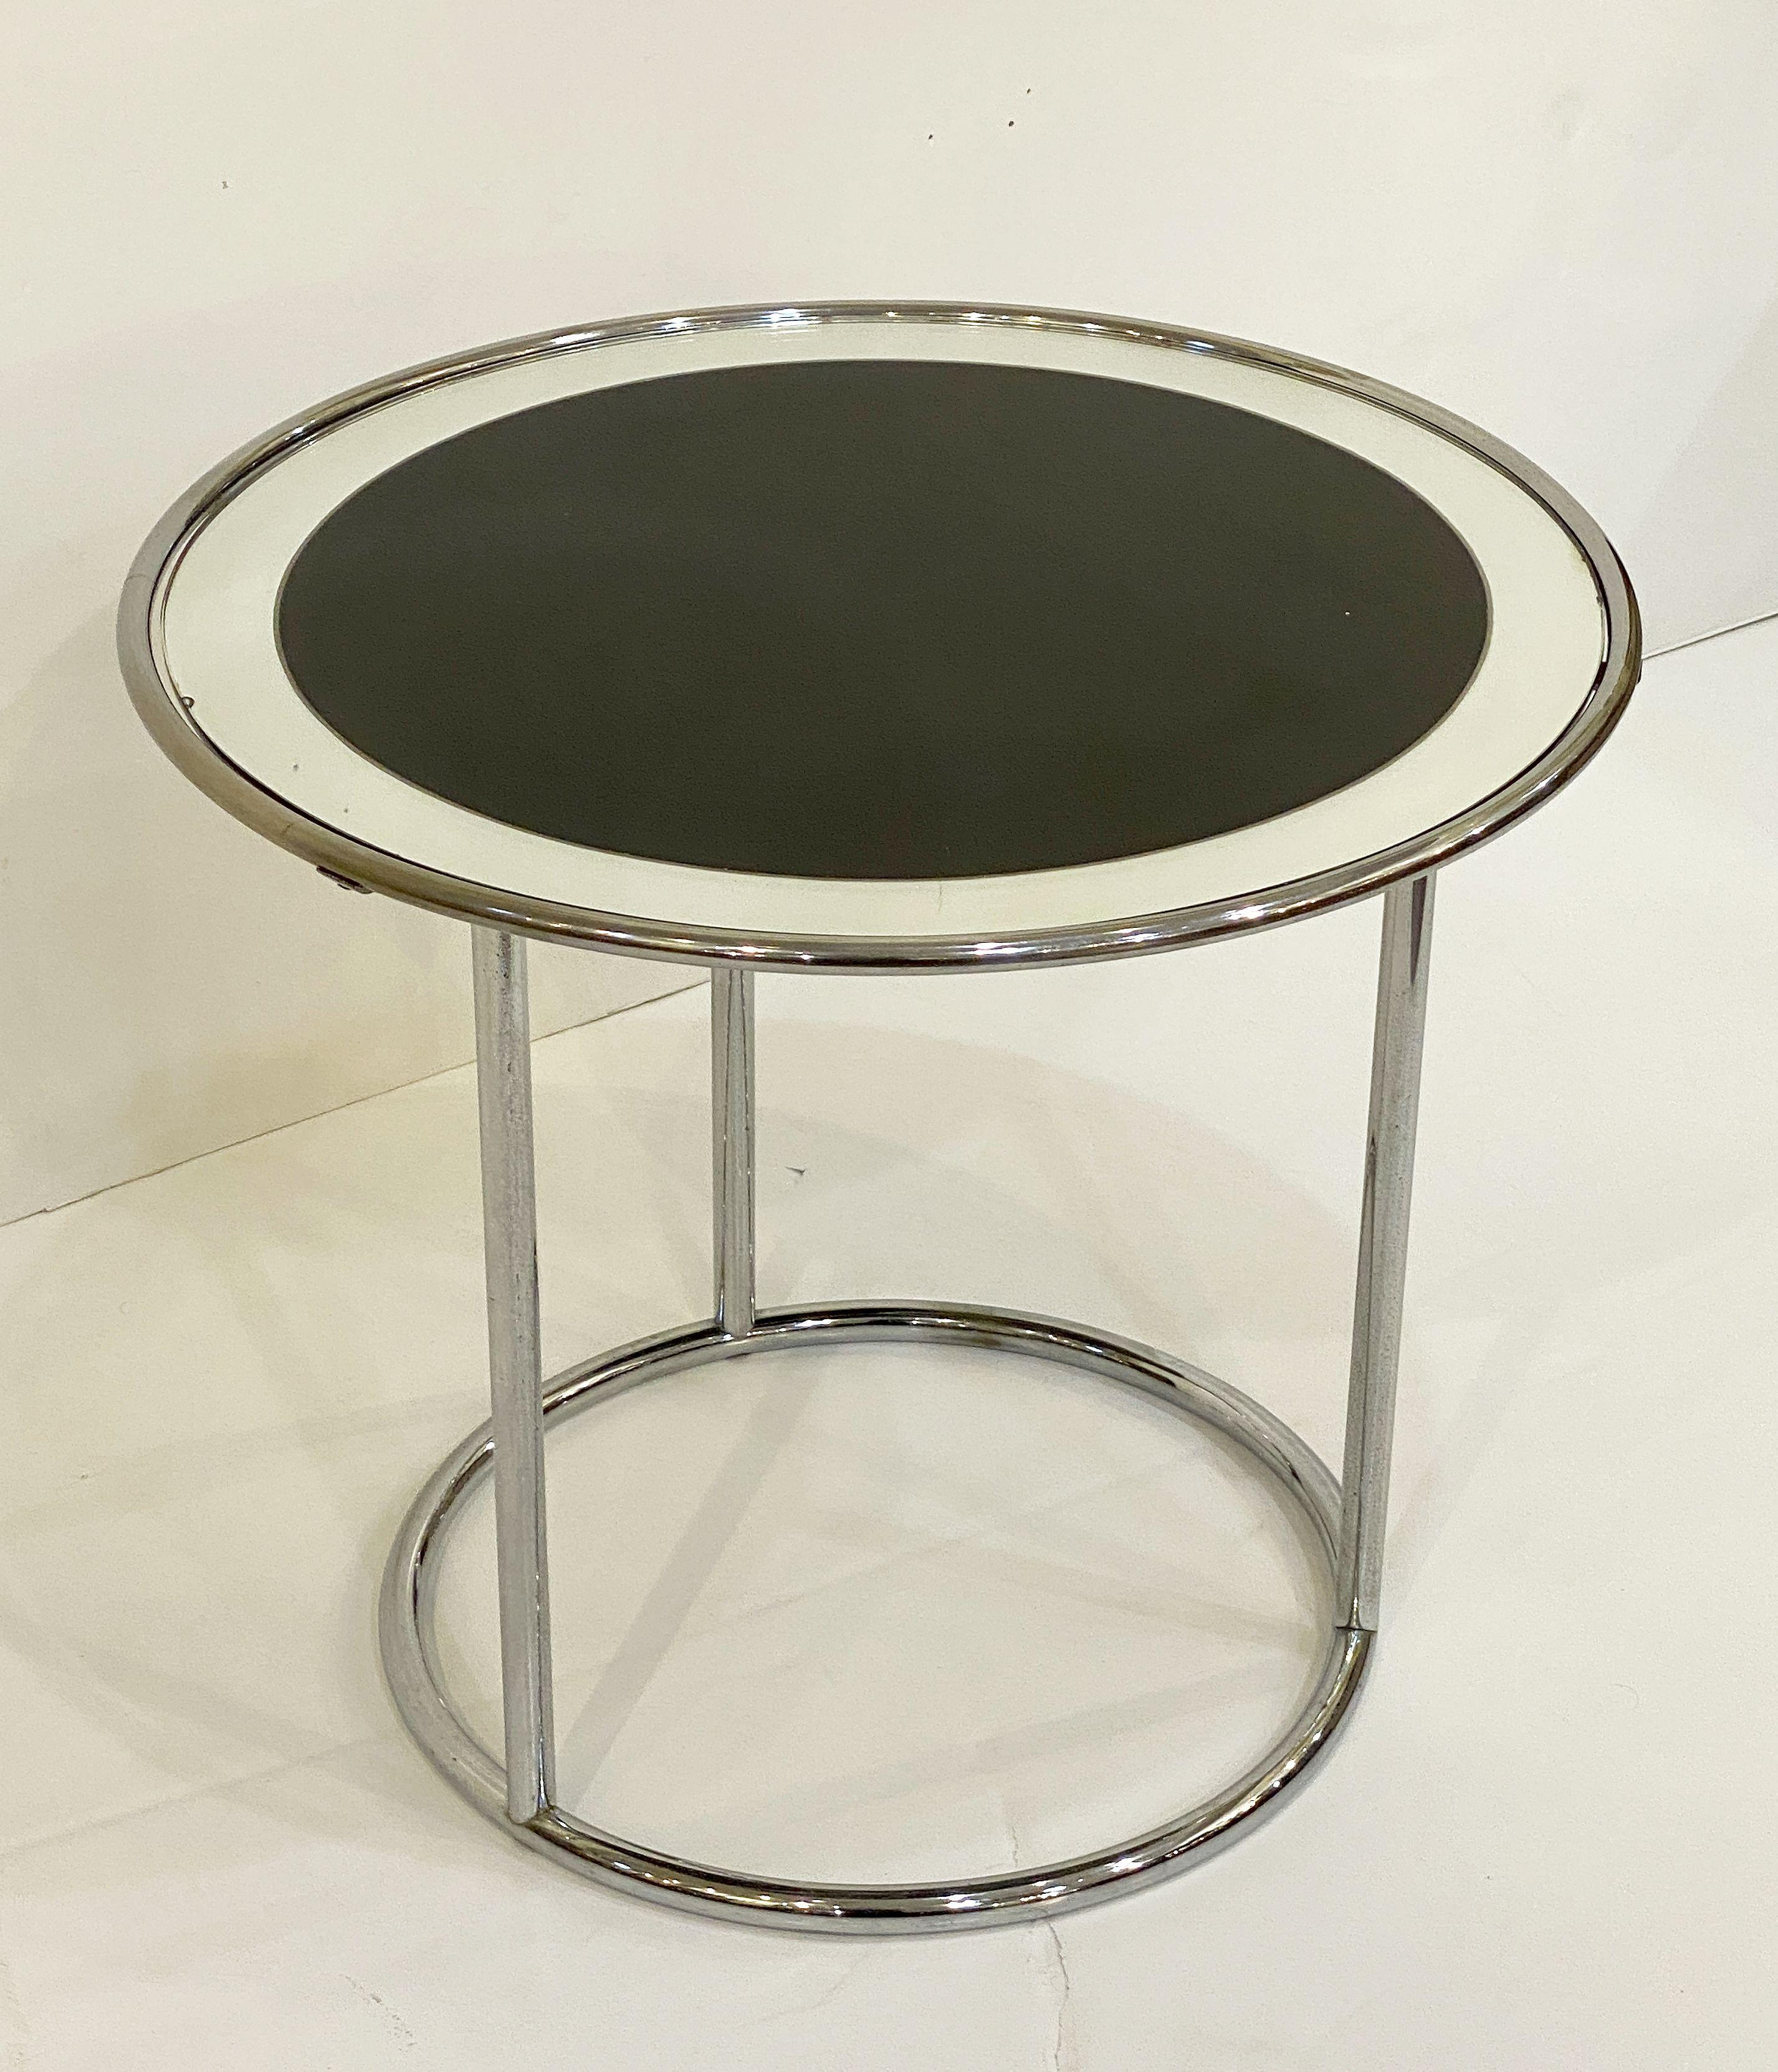 A fine English round or circular side table with a frame of chromed tubular steel from the Art Deco era, featuring a top circle tier of mirrored glass, set upon three tubular column supports. 

With maker's mark on base: J.M. Doughty & Sons, Ltd -